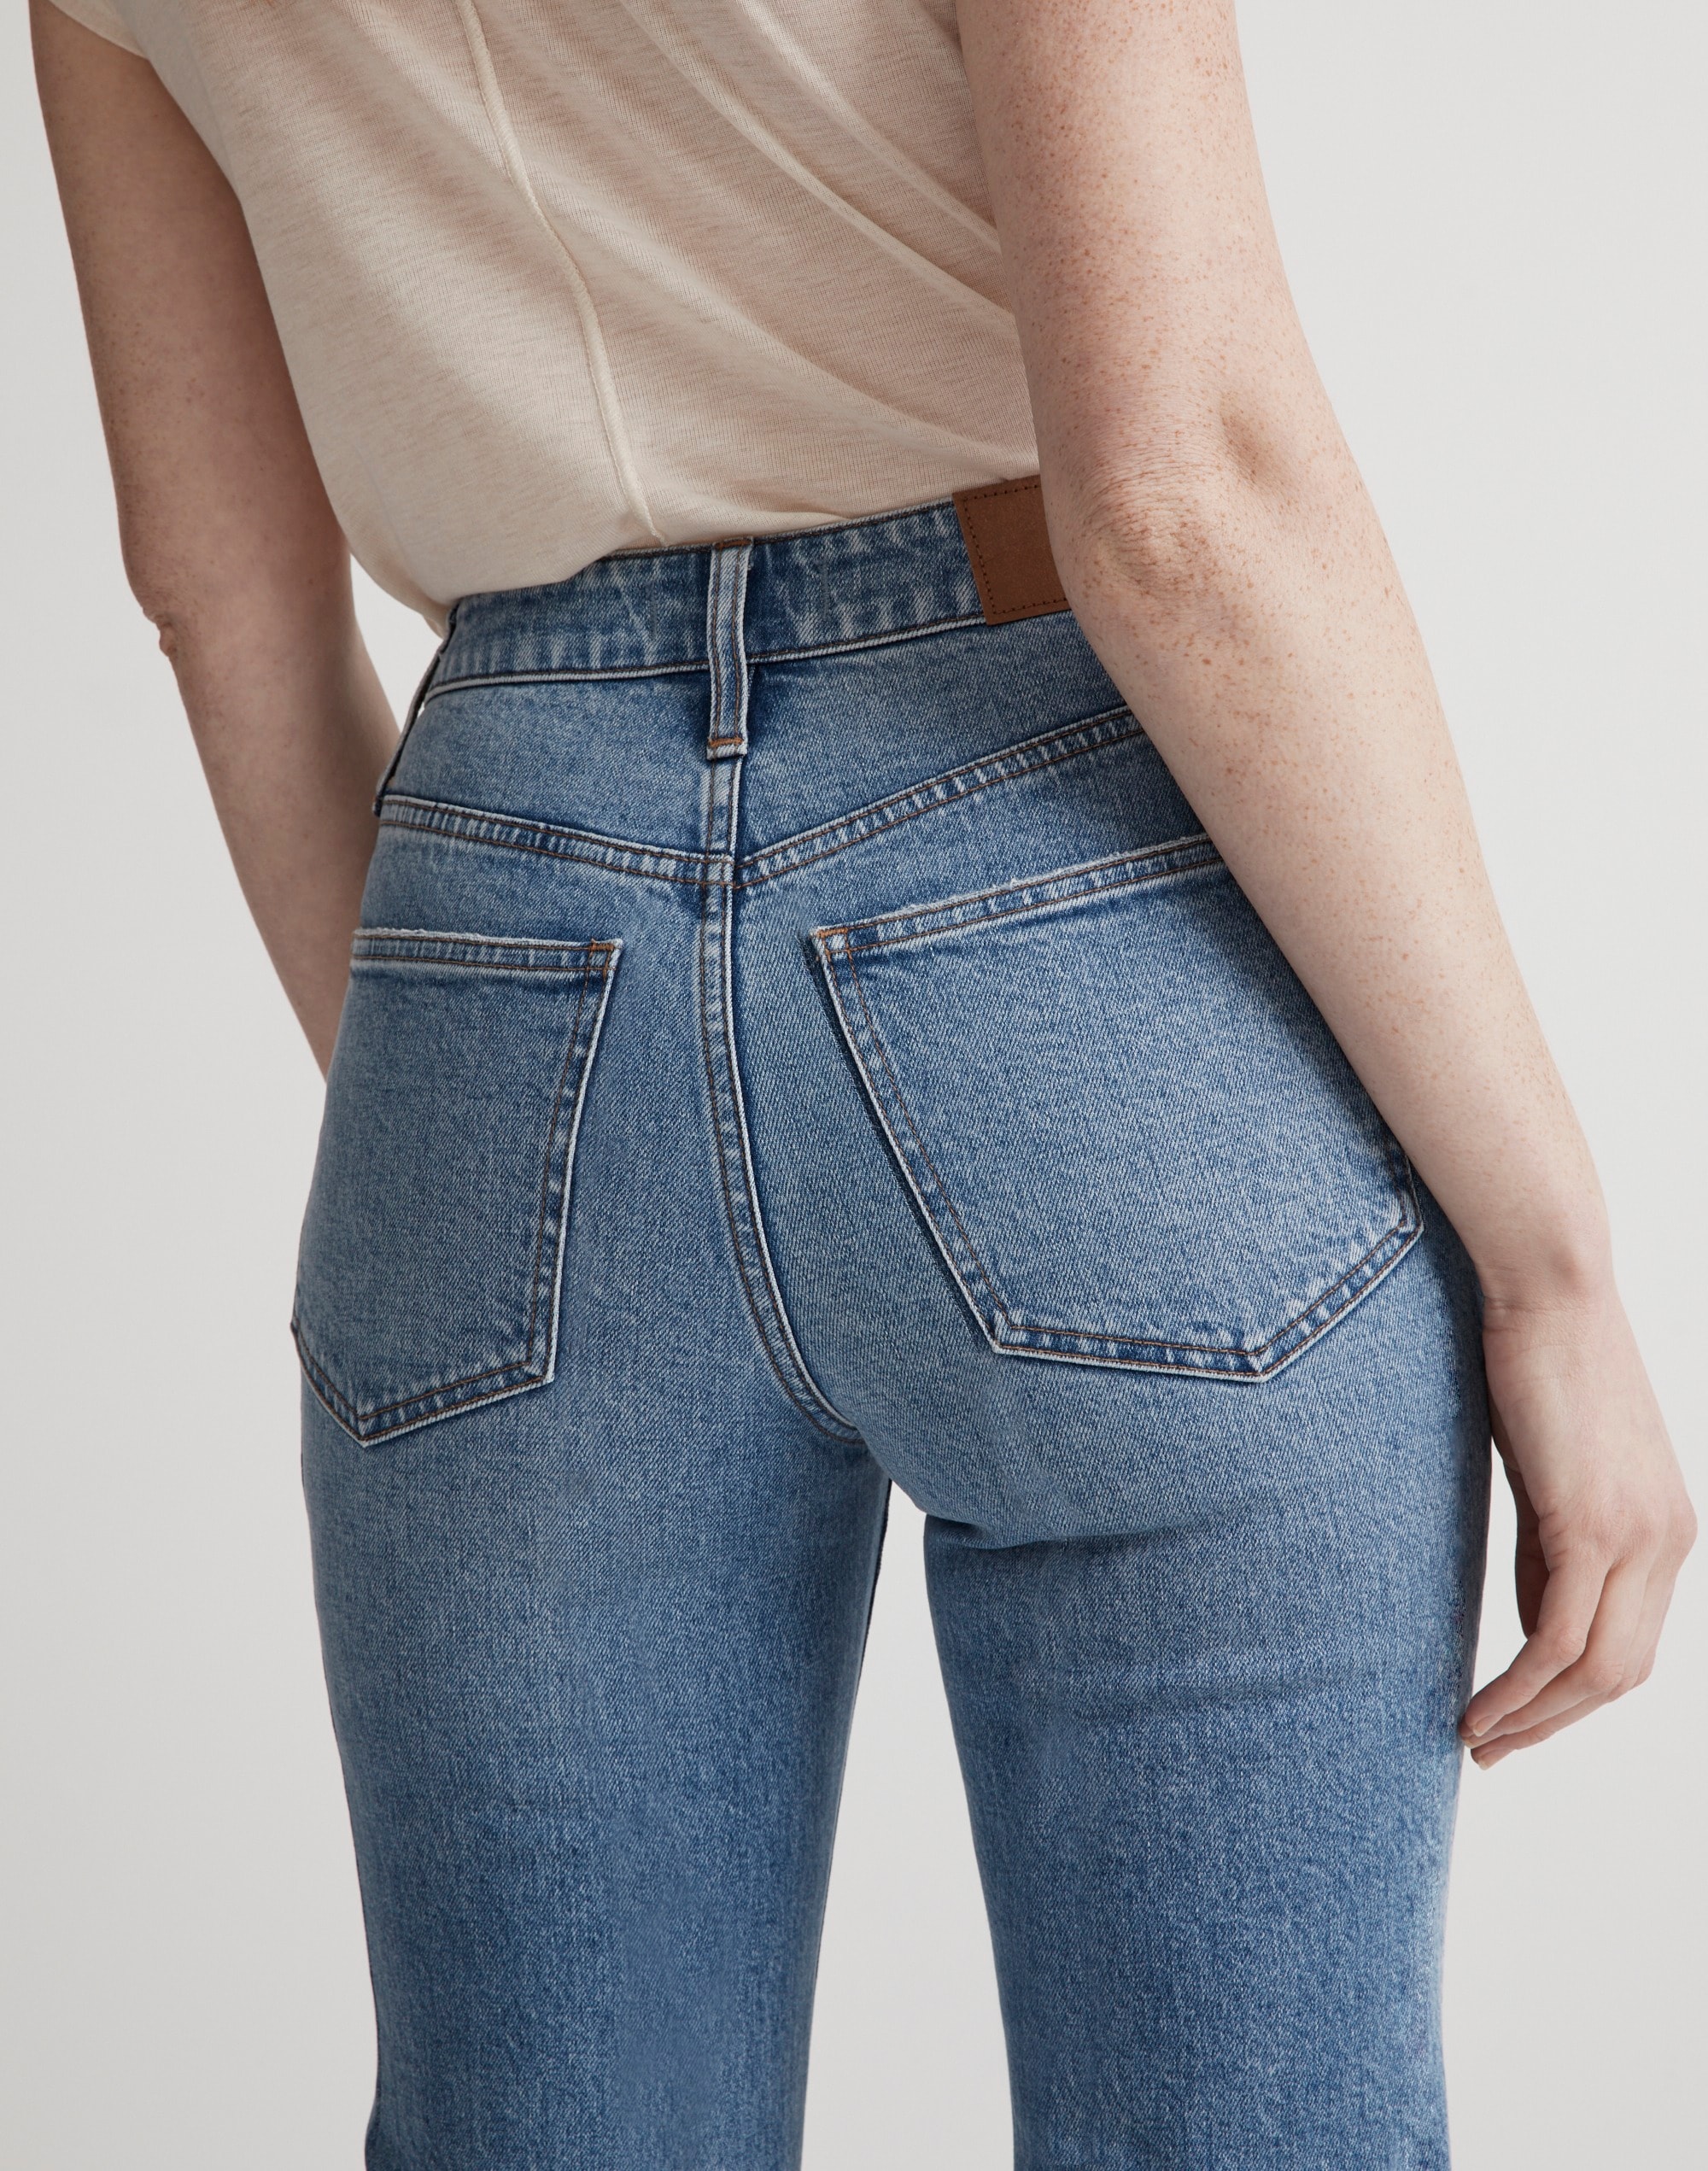 The Tall Perfect Vintage Flare Jean in Tarlow Wash